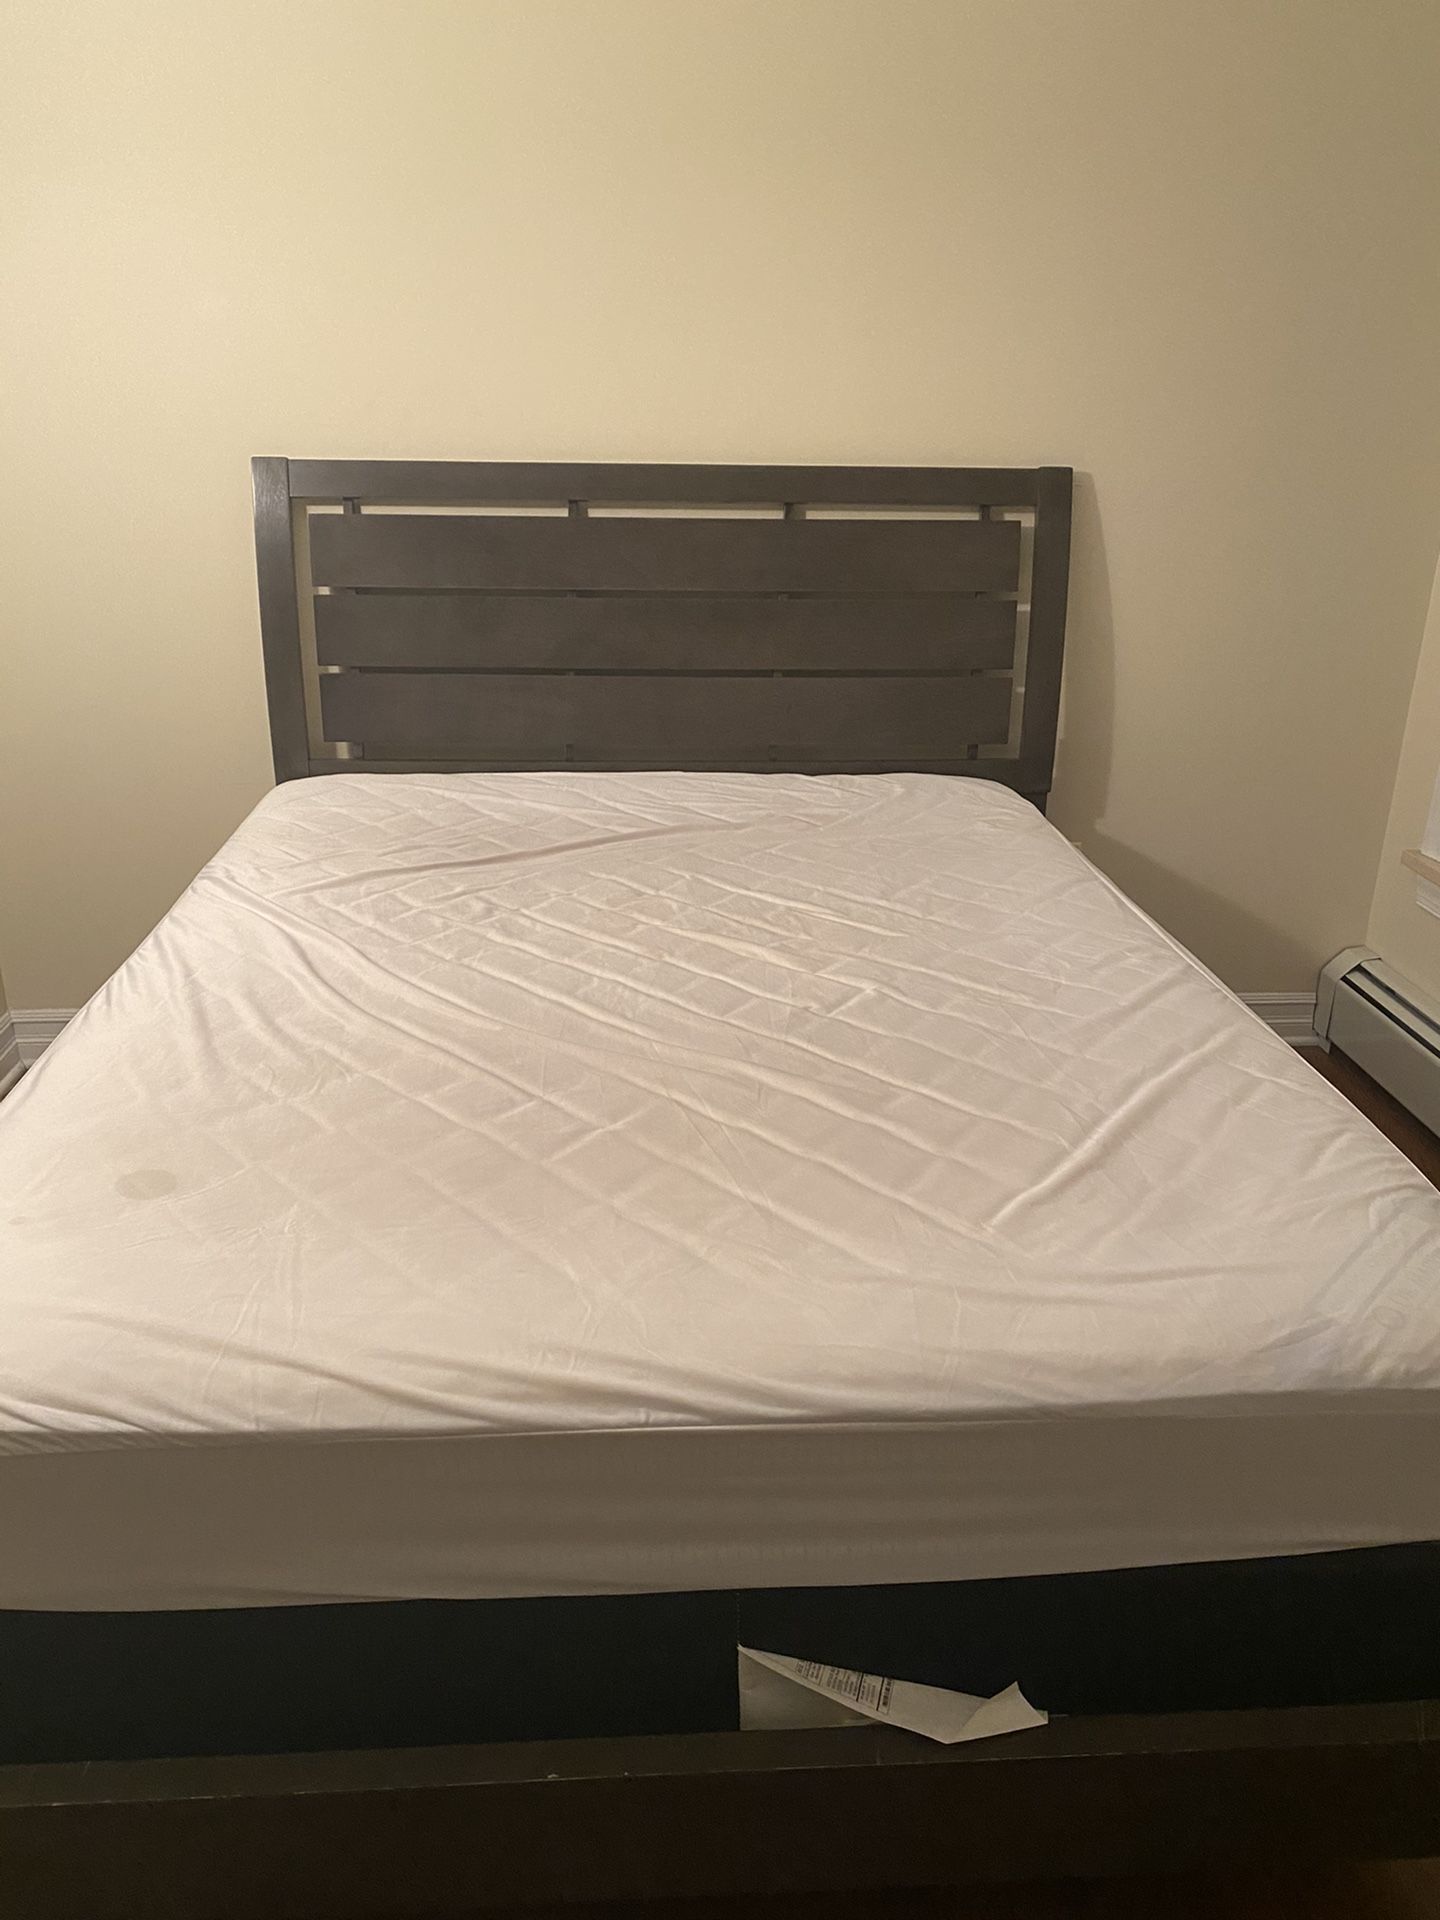 Full Queen size bed (mattress and frame)